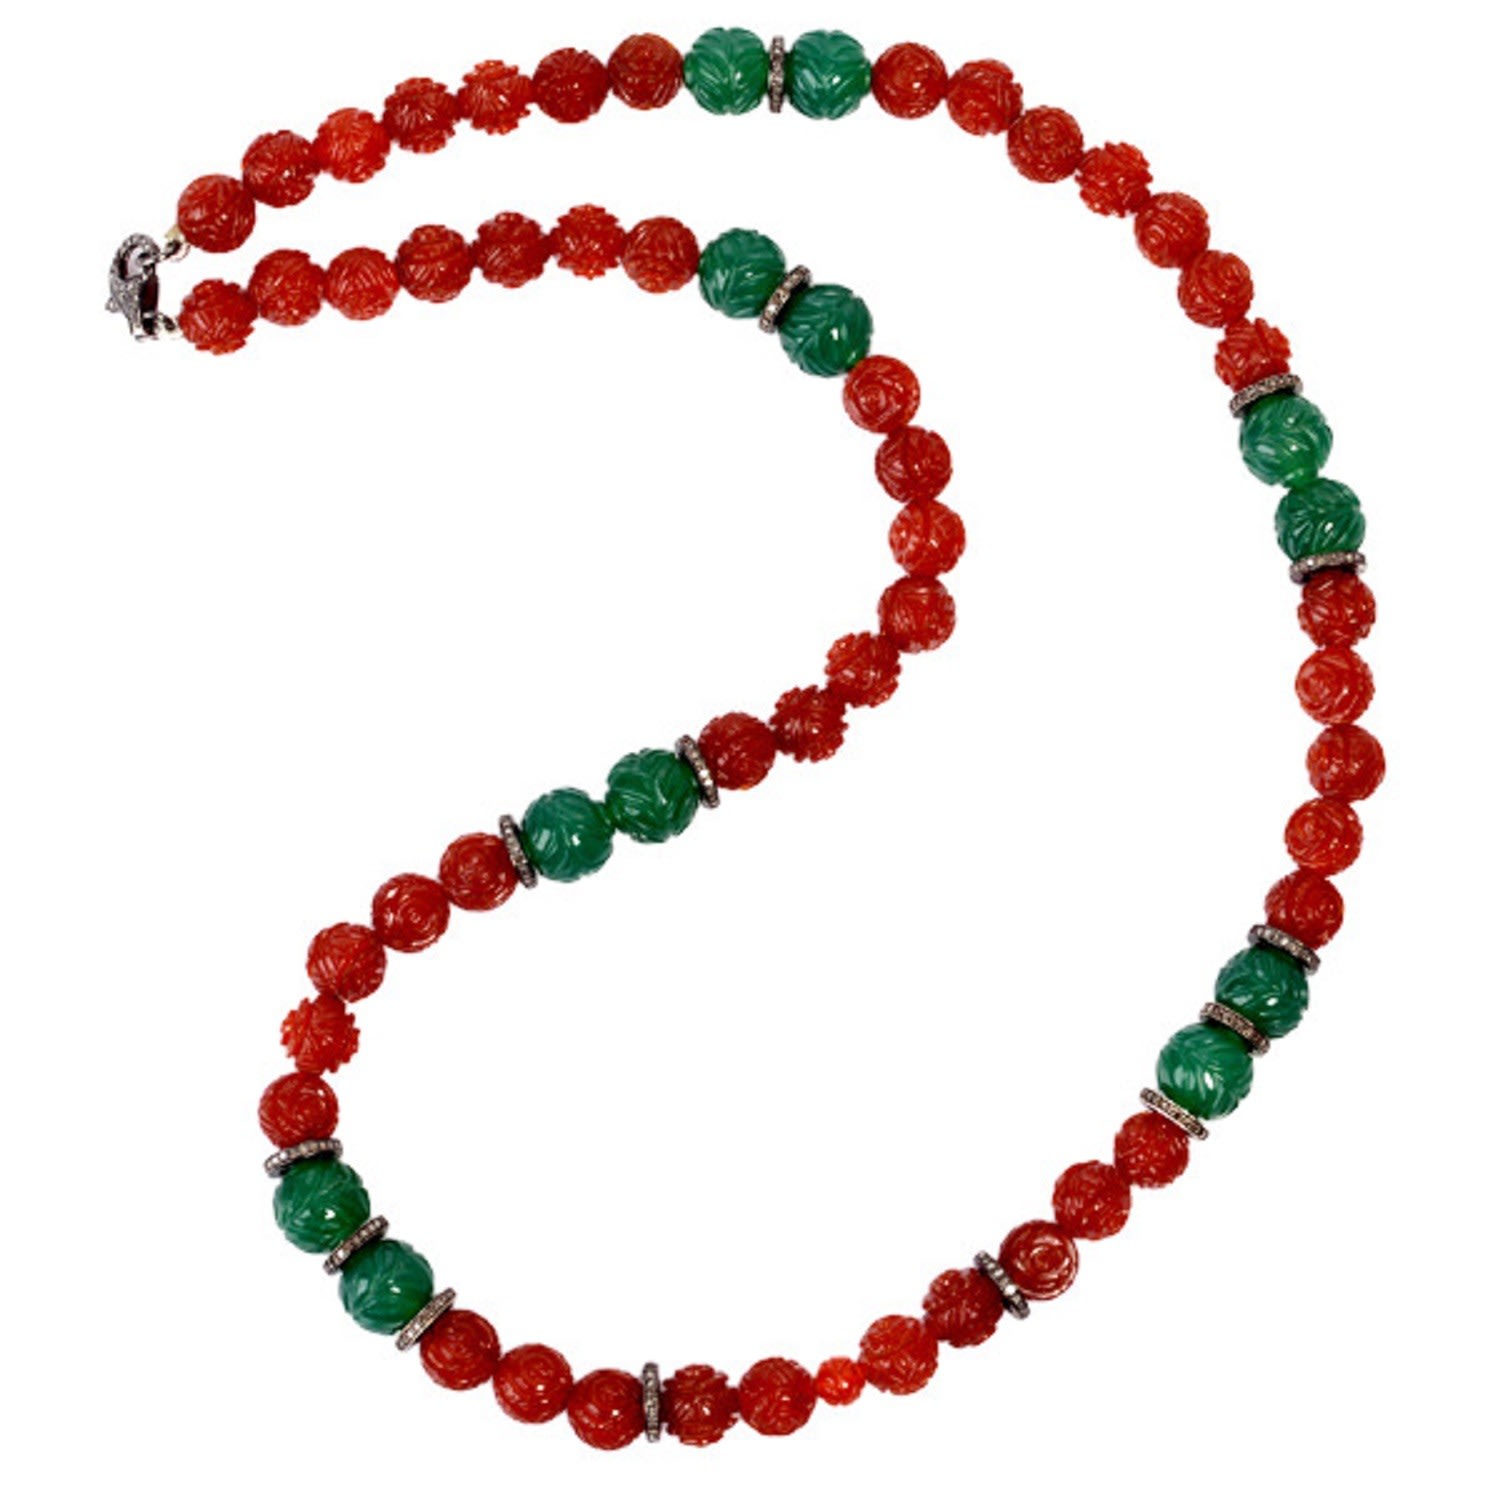 Women’s Yellow / Orange / Green Onyx & Agate Pave Diamond Carving Beaded Necklace In 925 Sterling Silver Jewelry Artisan